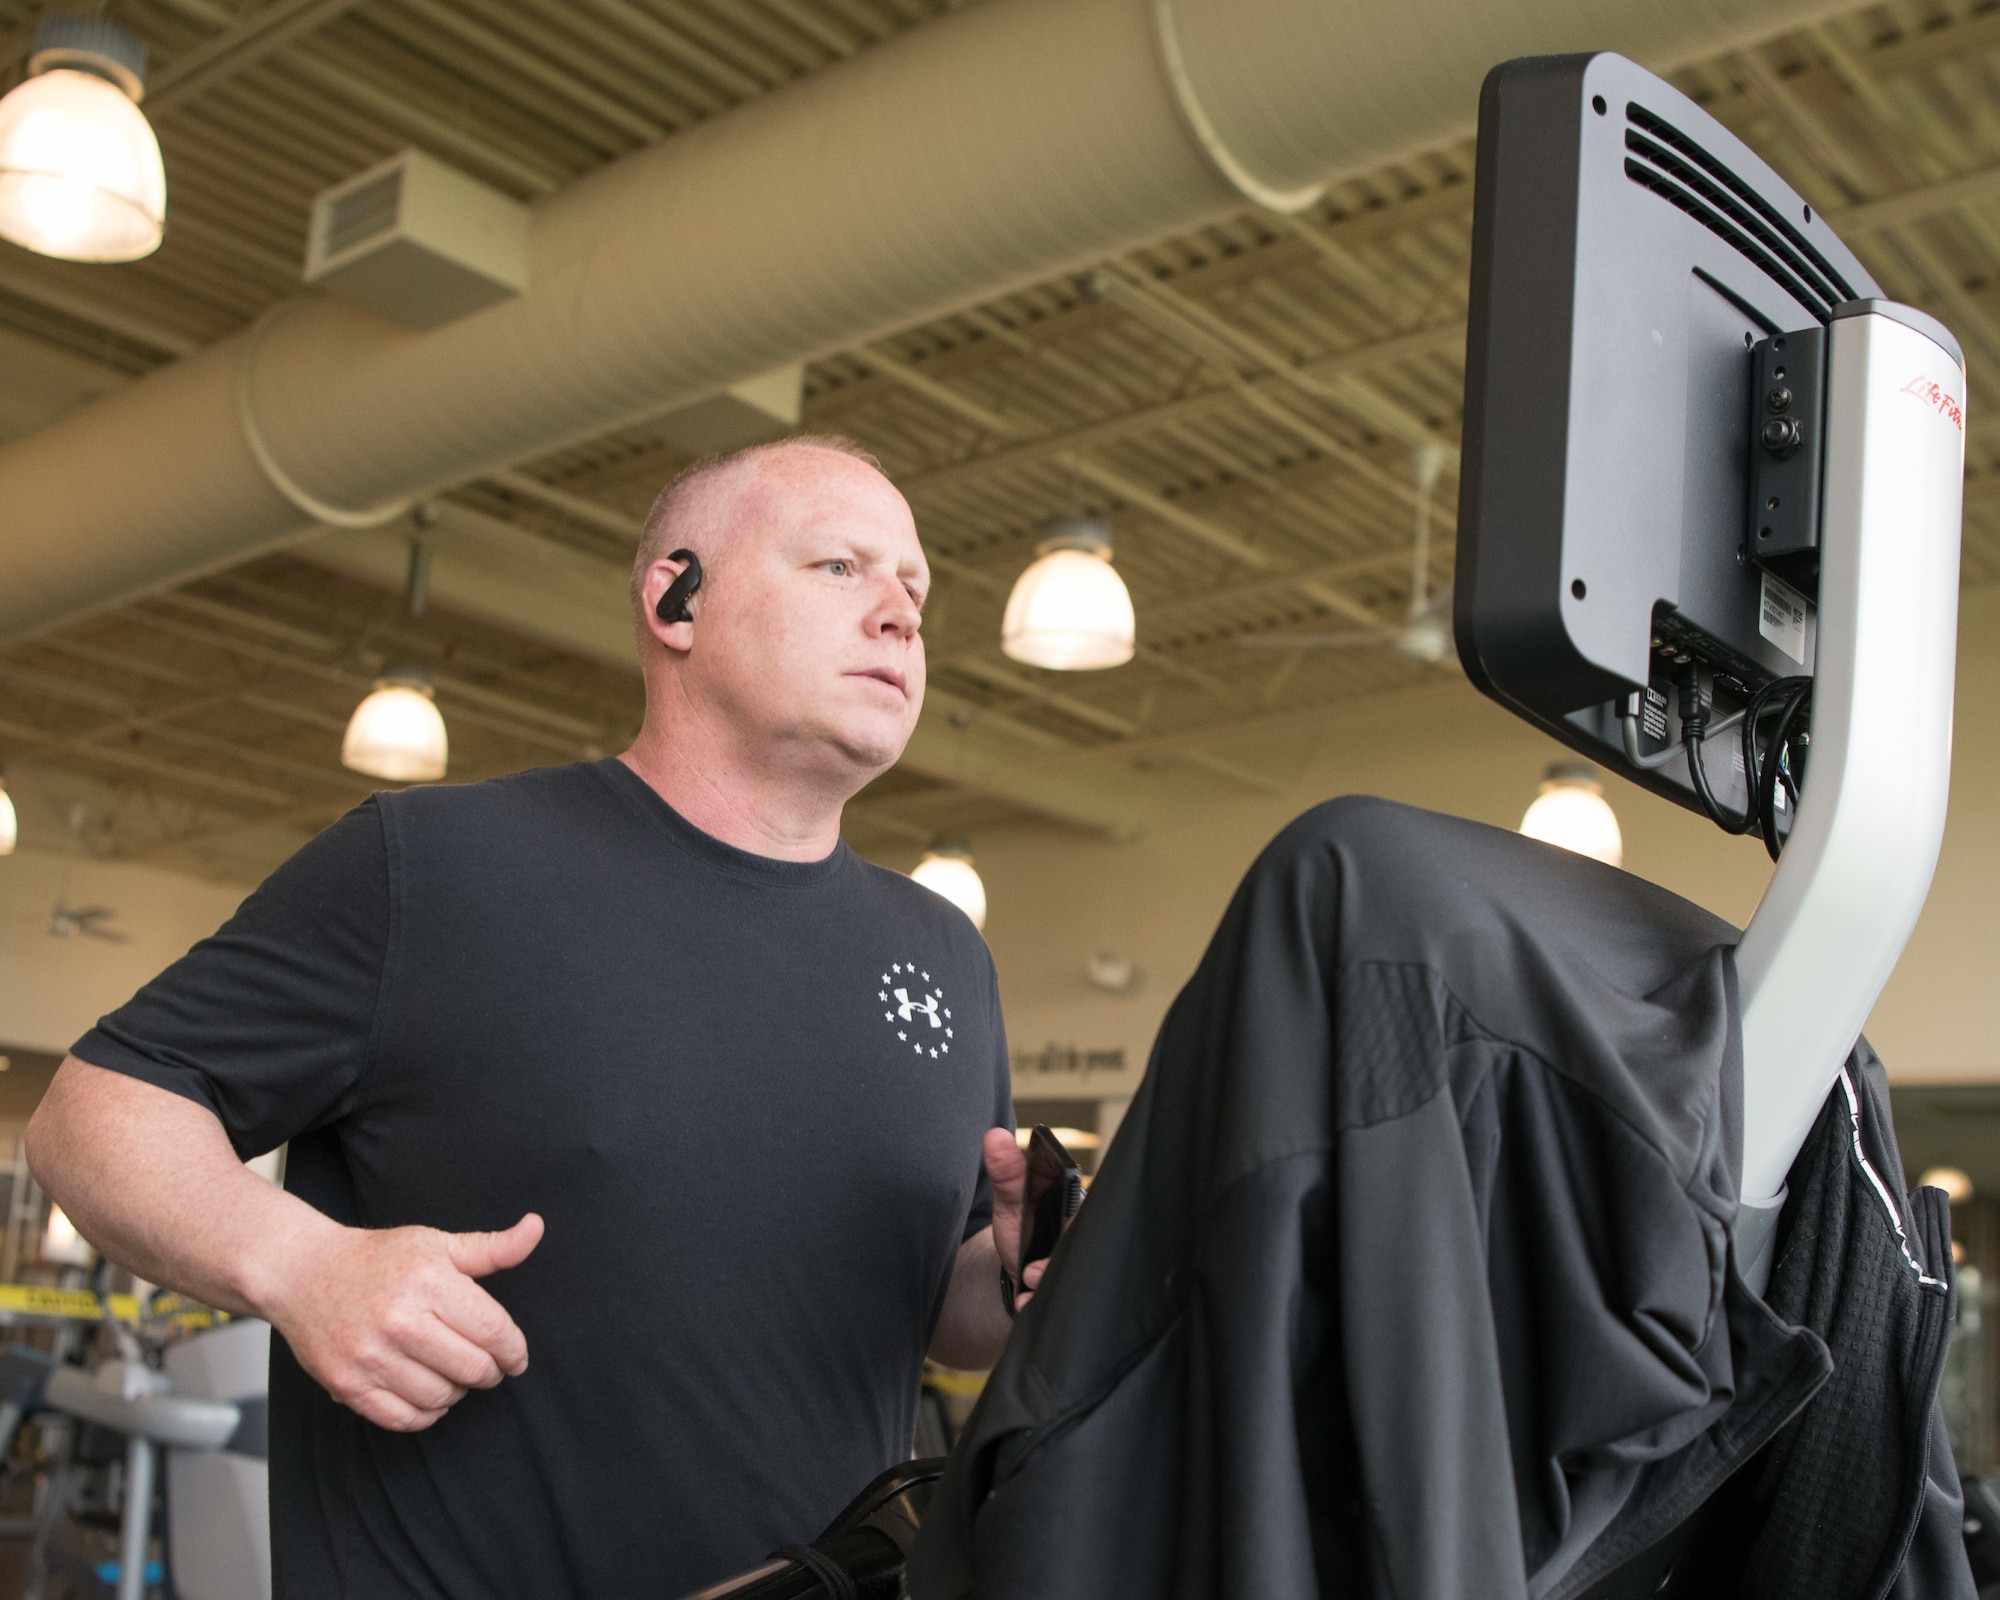 Senior Master Sgt. Ken Bachman, 512th
Recruiting Squadron flight chief, runs on a
treadmill at the fitness center, May 20, 2020, at
Dover Air Force Base, Delaware. As part of the
base’s Phase I reopening, military members are
allotted up to three one-hour workouts per
calendar week. (U.S. Air Force photo by Mauricio Campino)